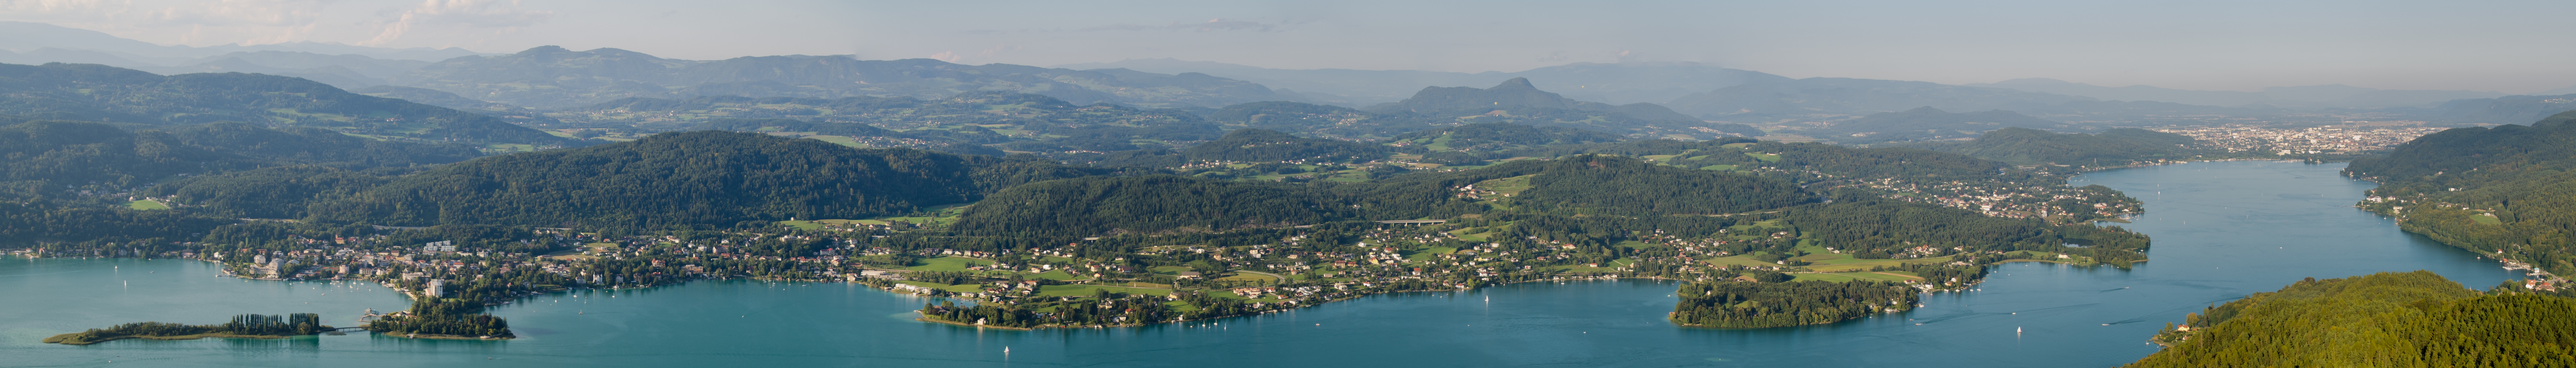 Where’s the closest brothel in Klagenfurt am Wörthersee?